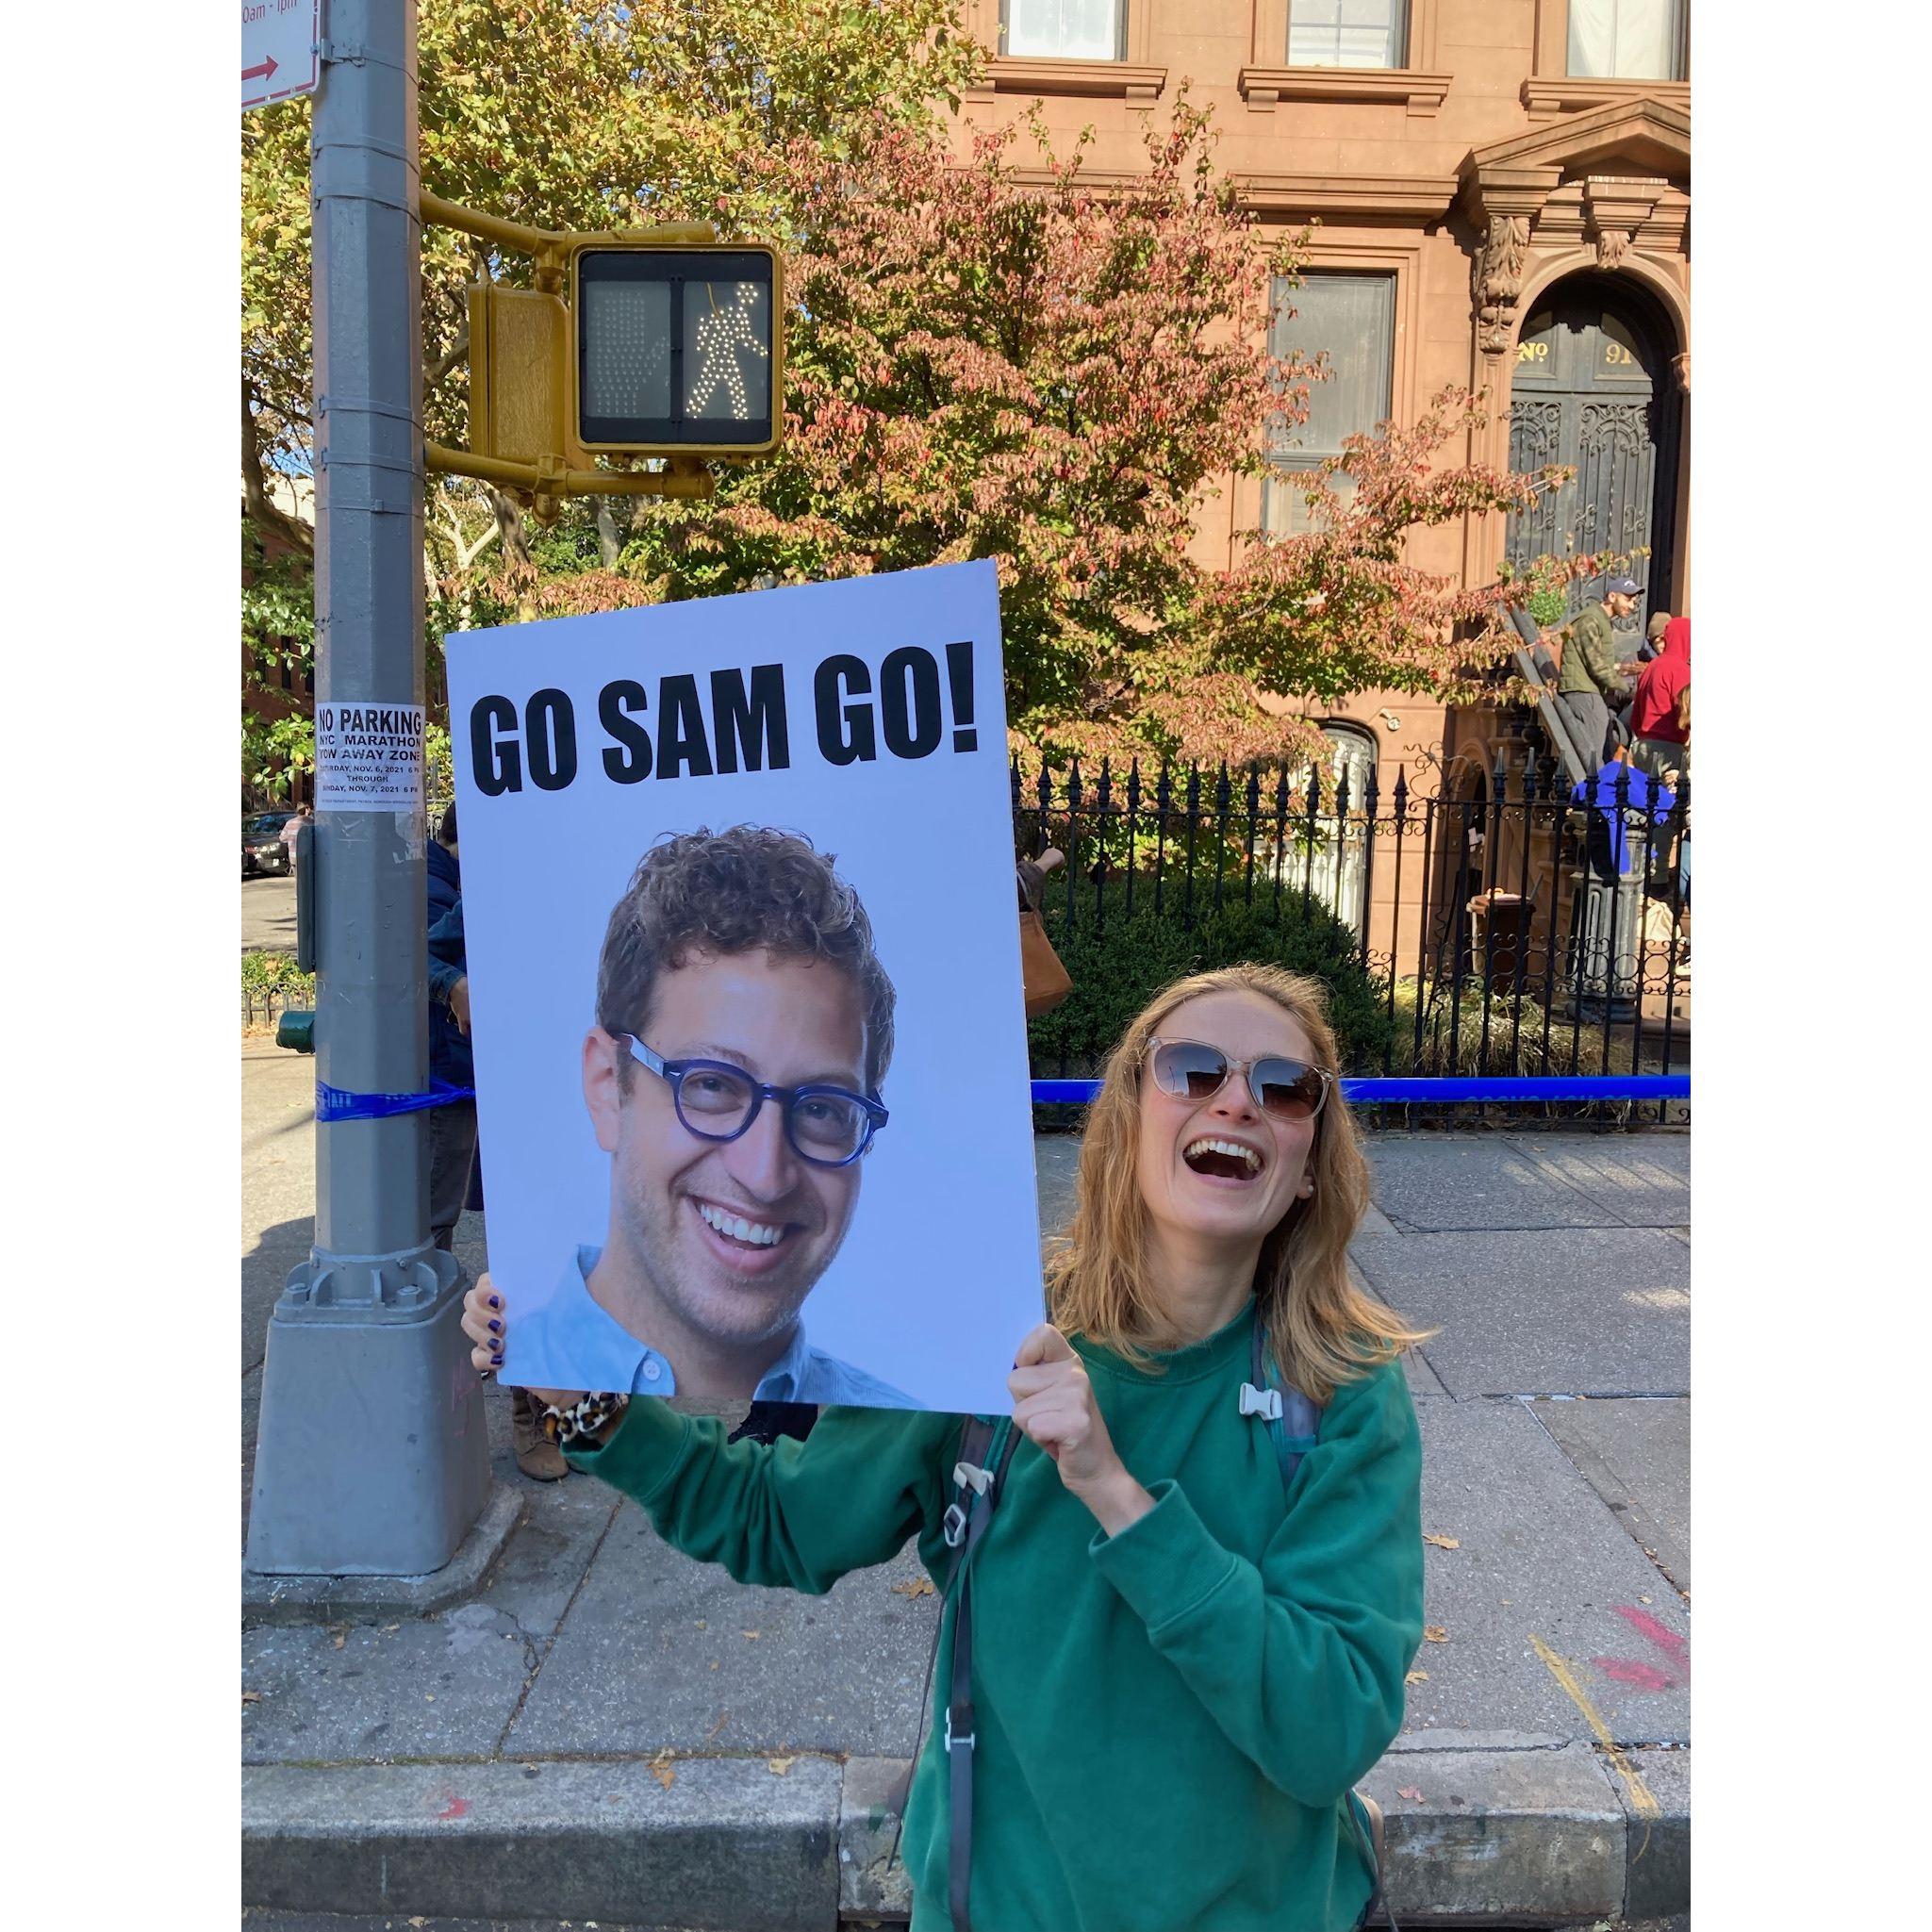 Sam ran the NYC marathon if anyone has managed to forget!